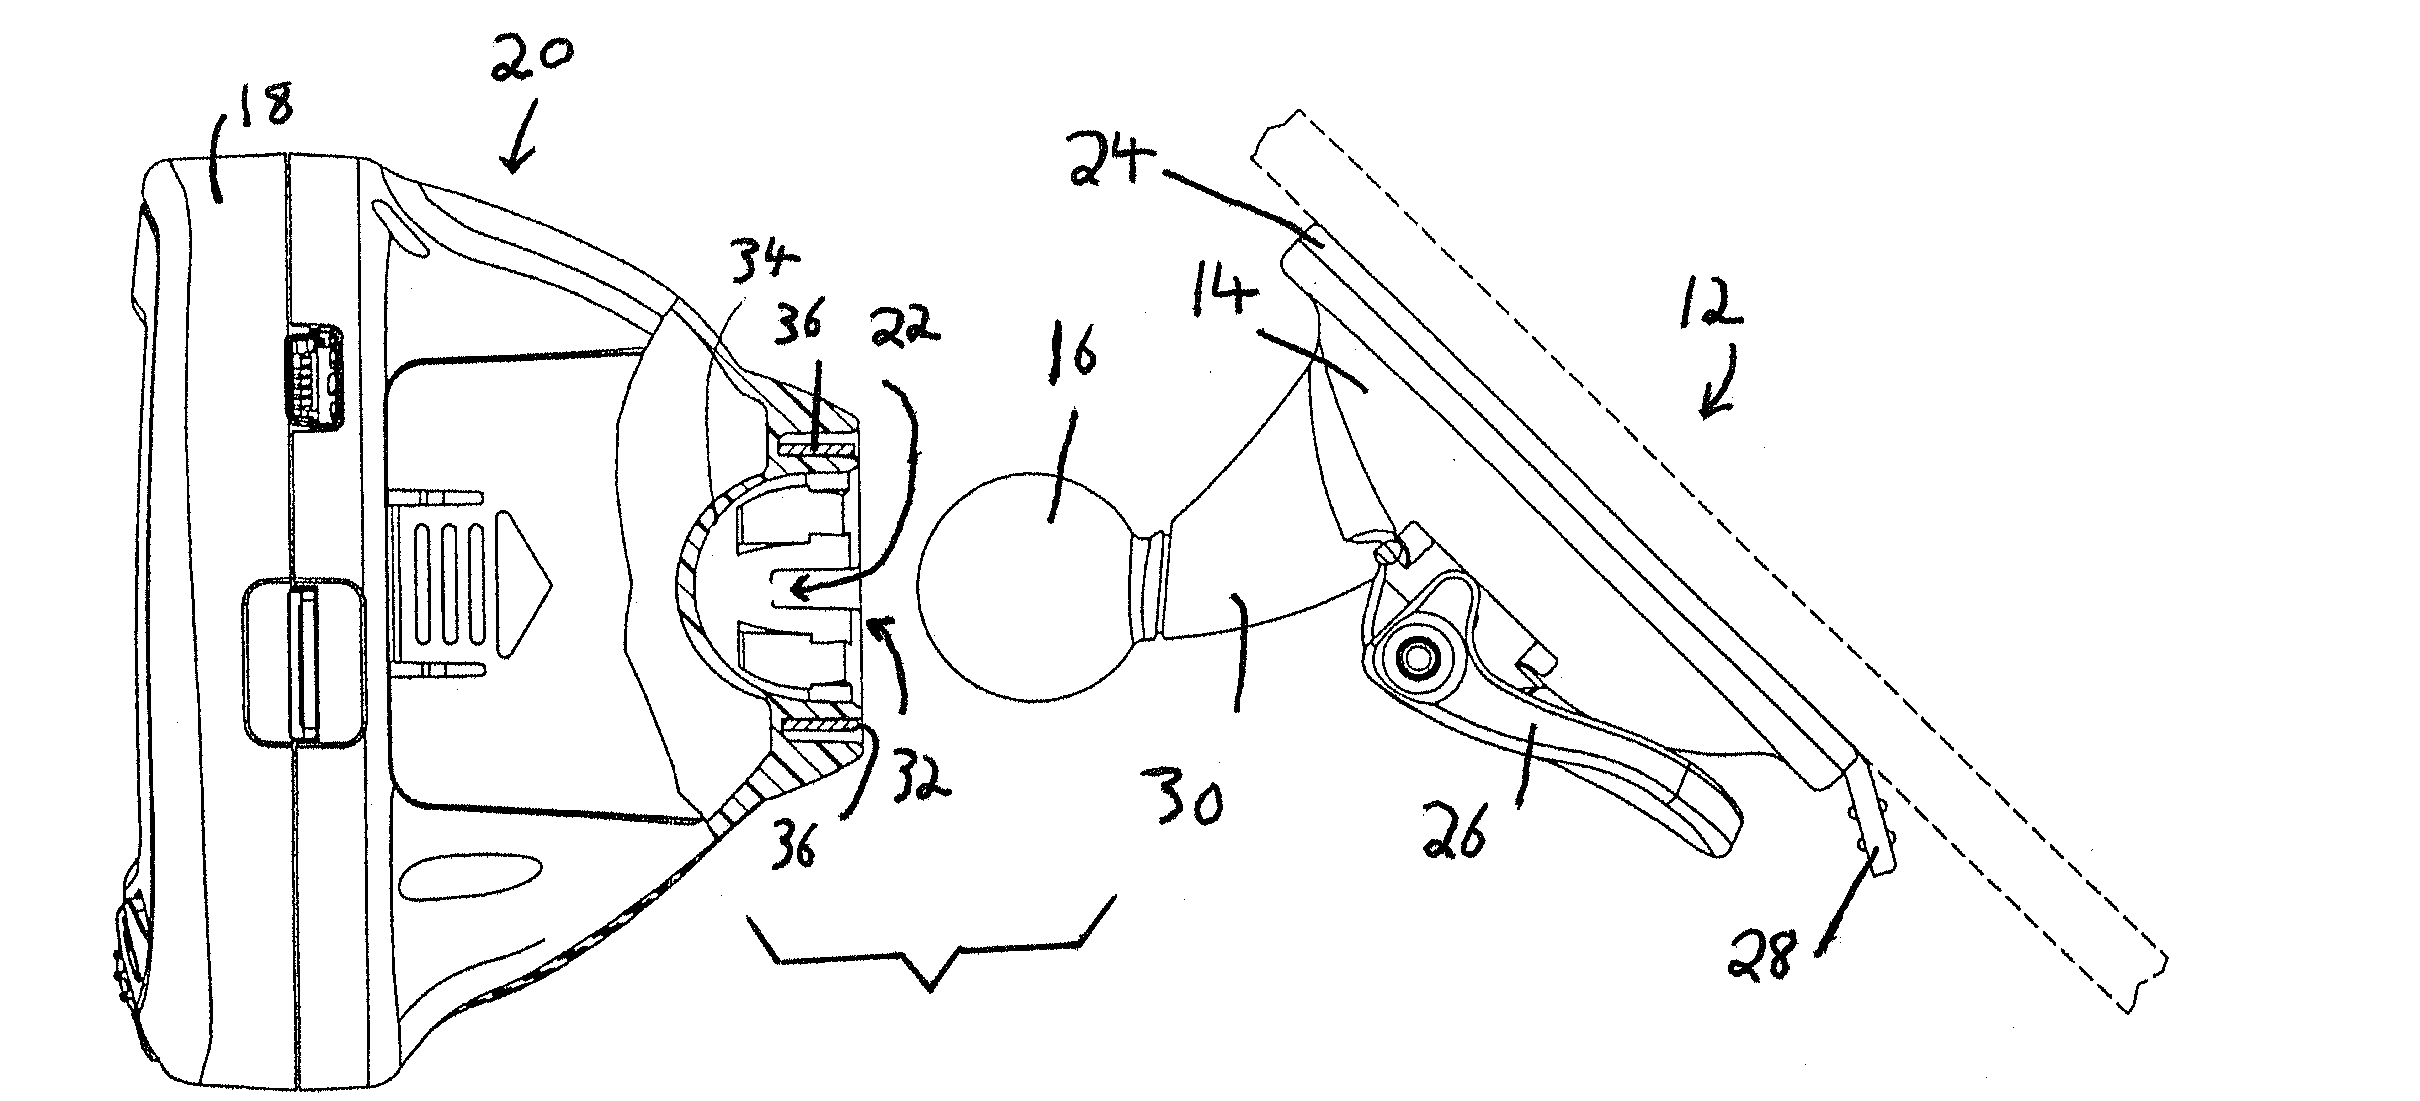 Mount assembly for electronic devices